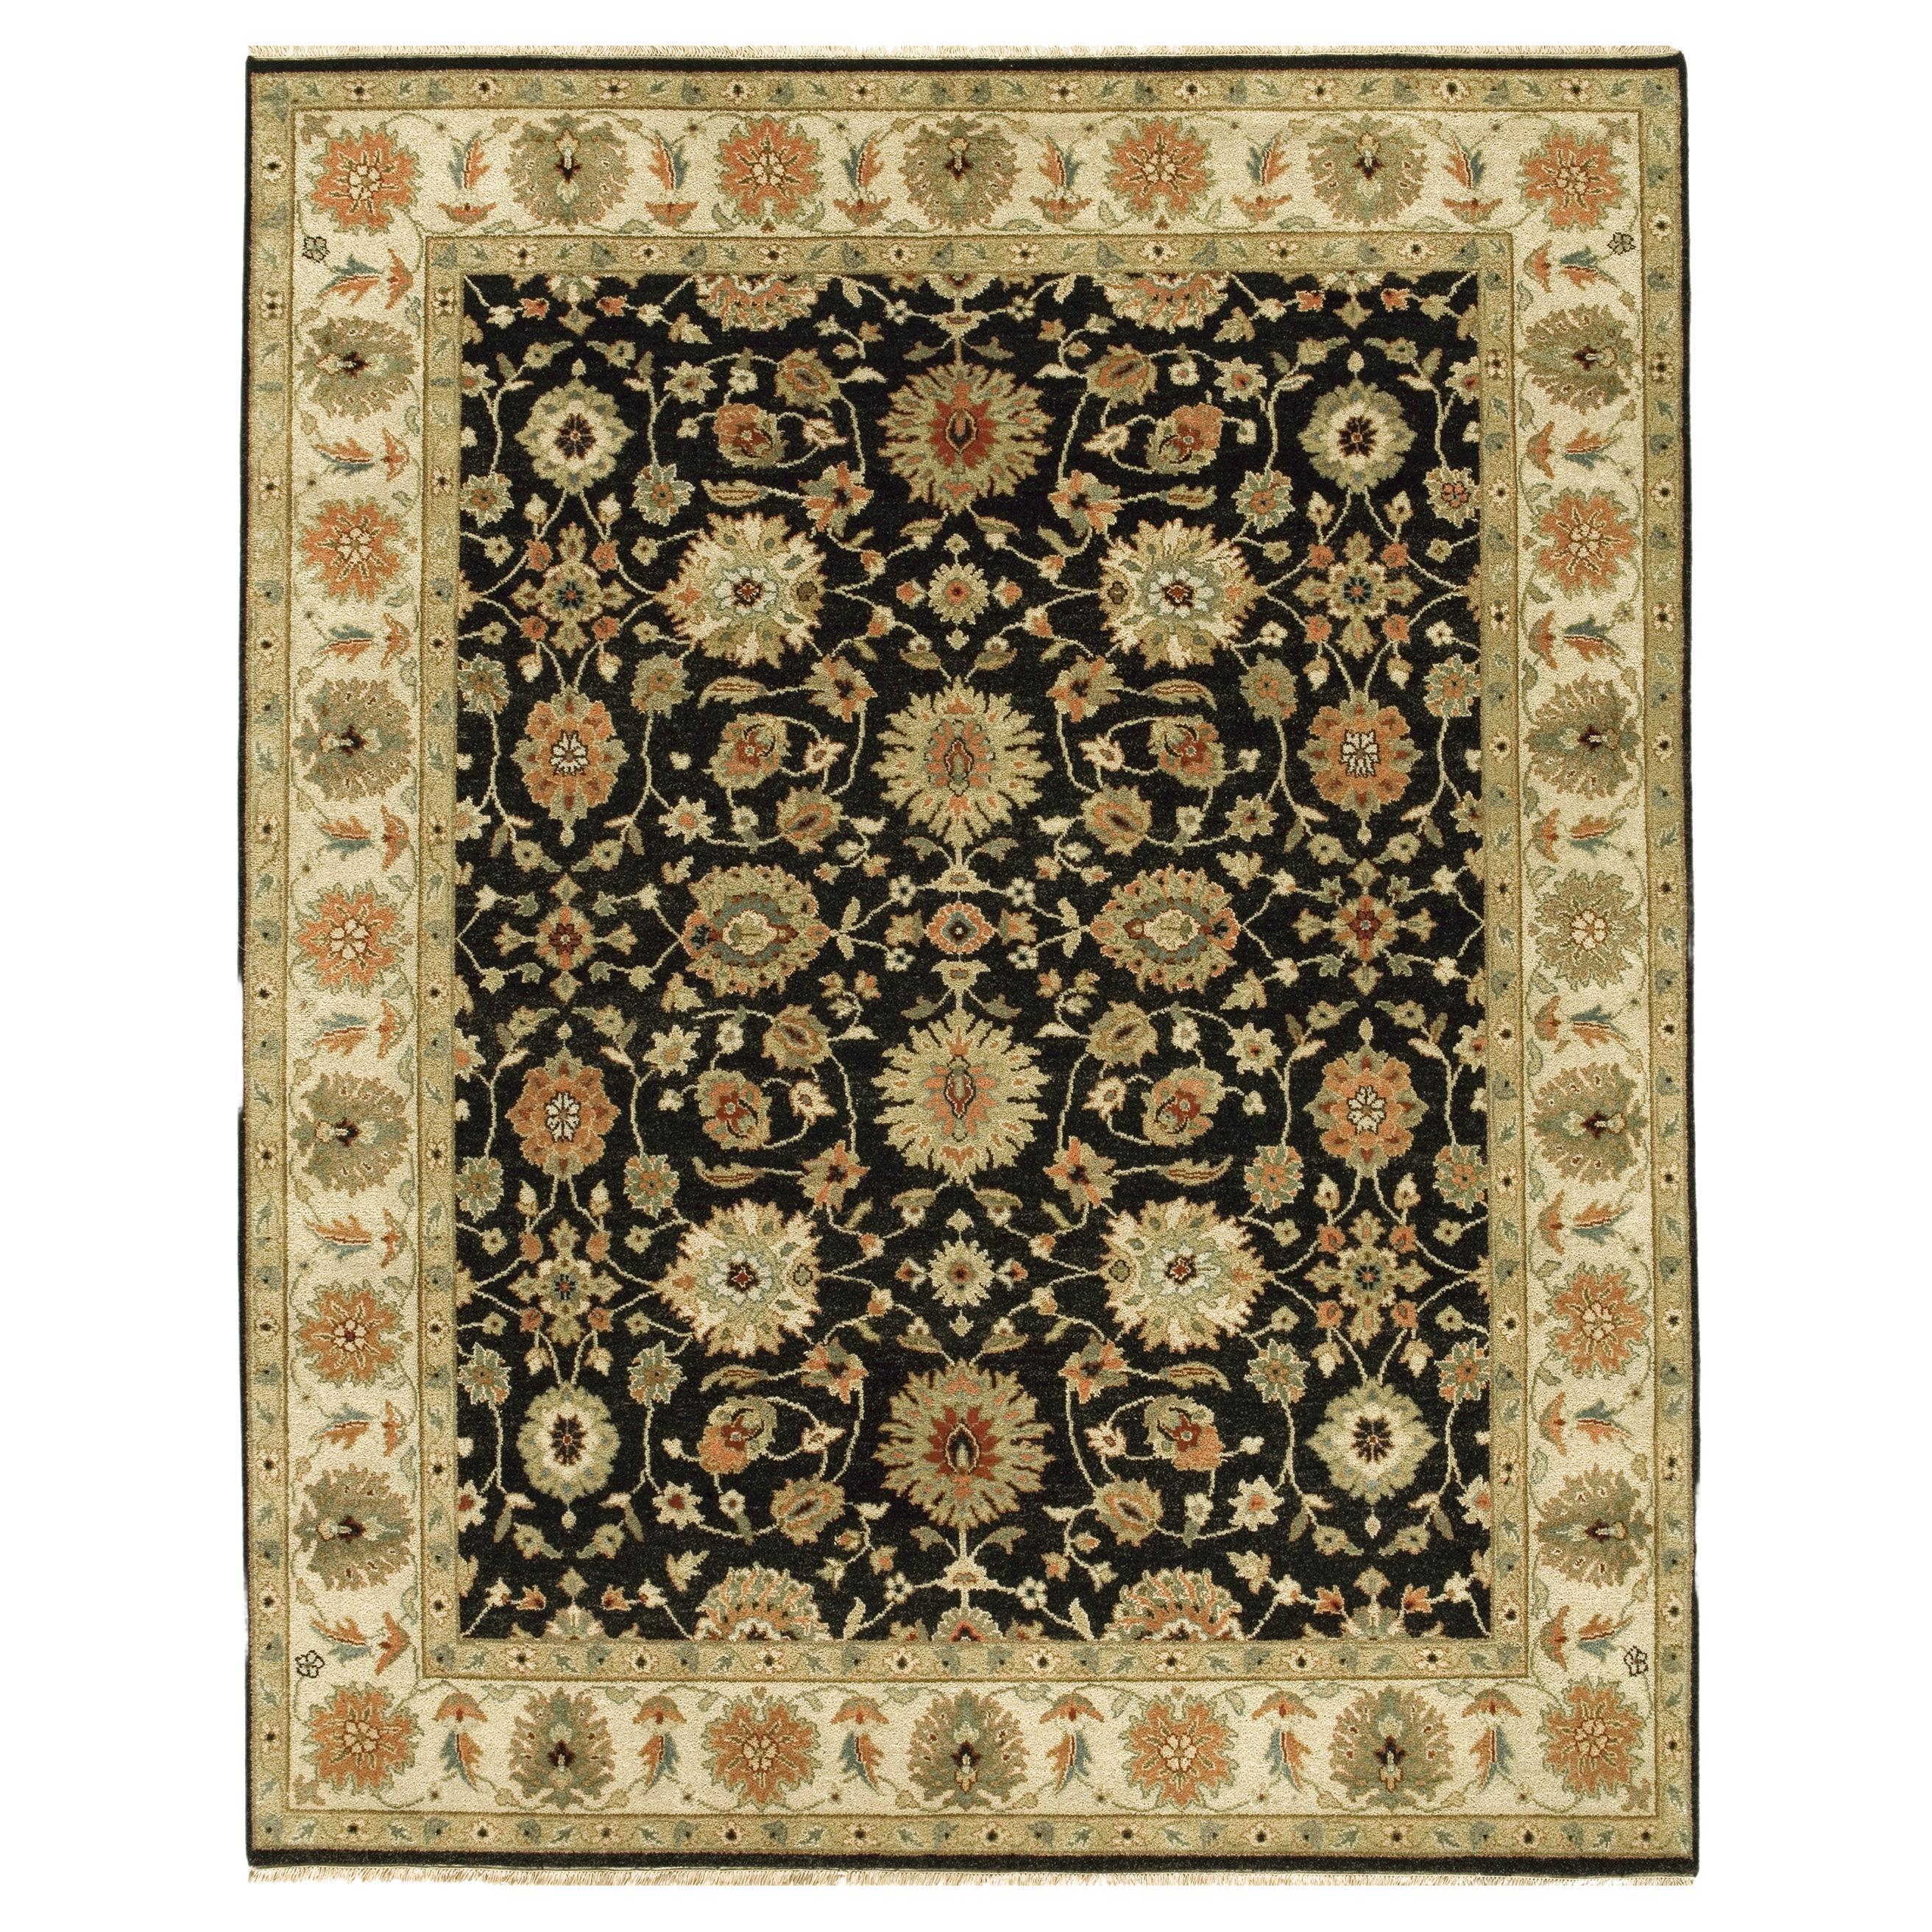 Luxury Traditional Hand-Knotted Agra Black & Ivory 12x22 Rug